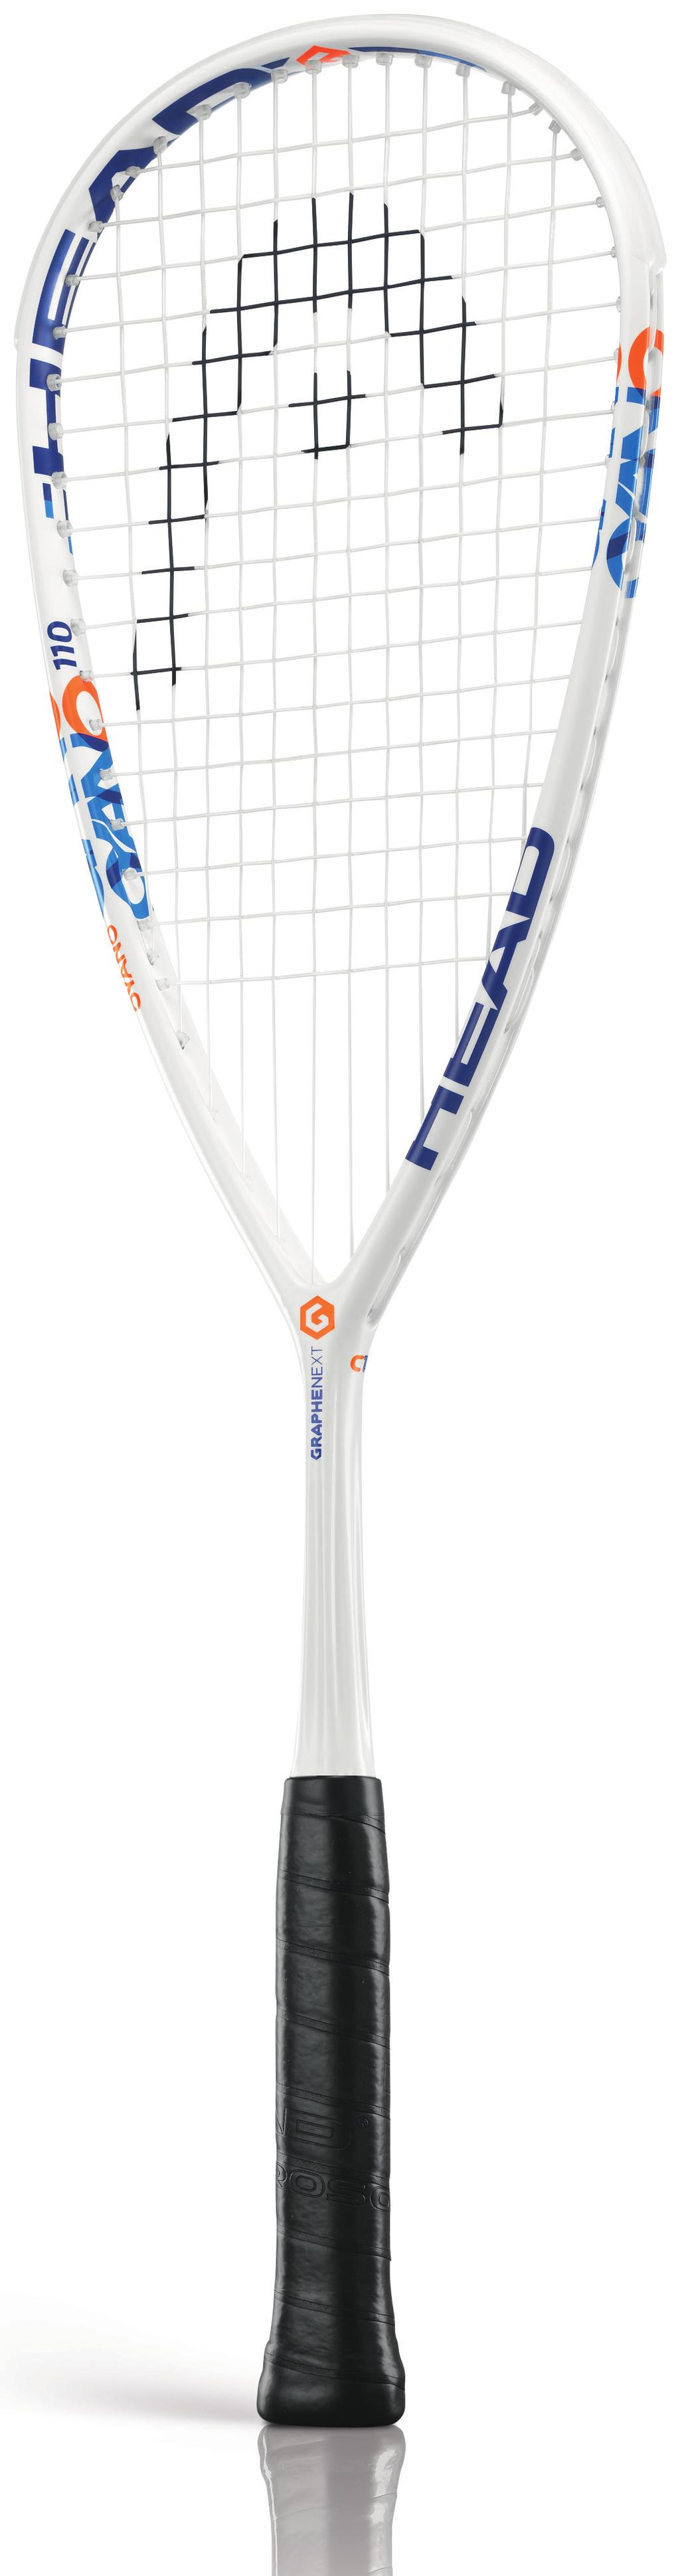 It is the perfect racquet for the ambitious player offering powerful strokes by using HEAD s new Graphene XT